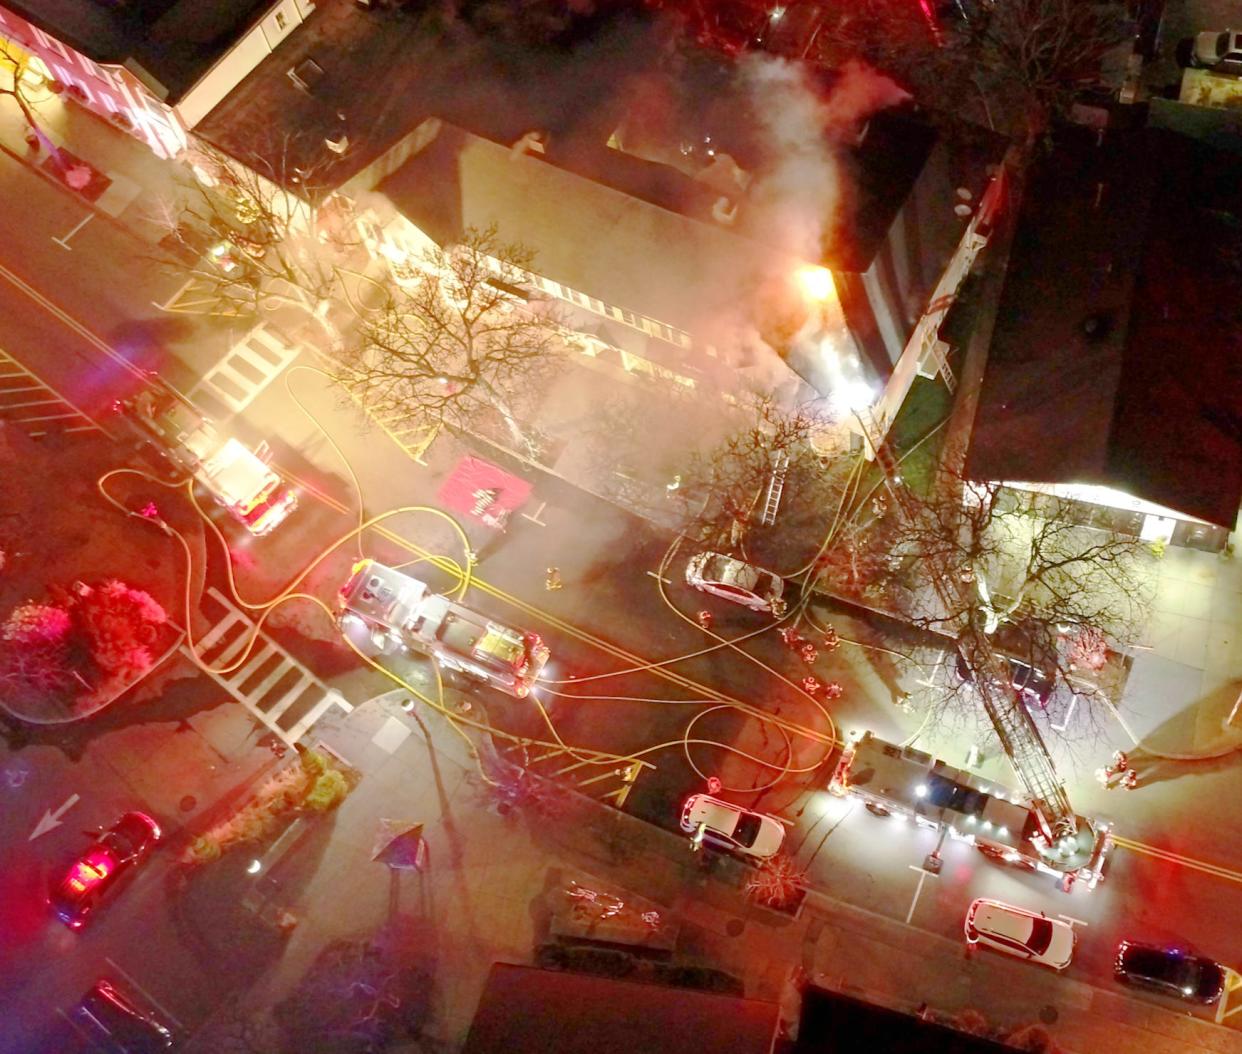 An aerial view of 172-176 Main St. in Falmouth as firefighters fought a smoky fire early Monday evening.